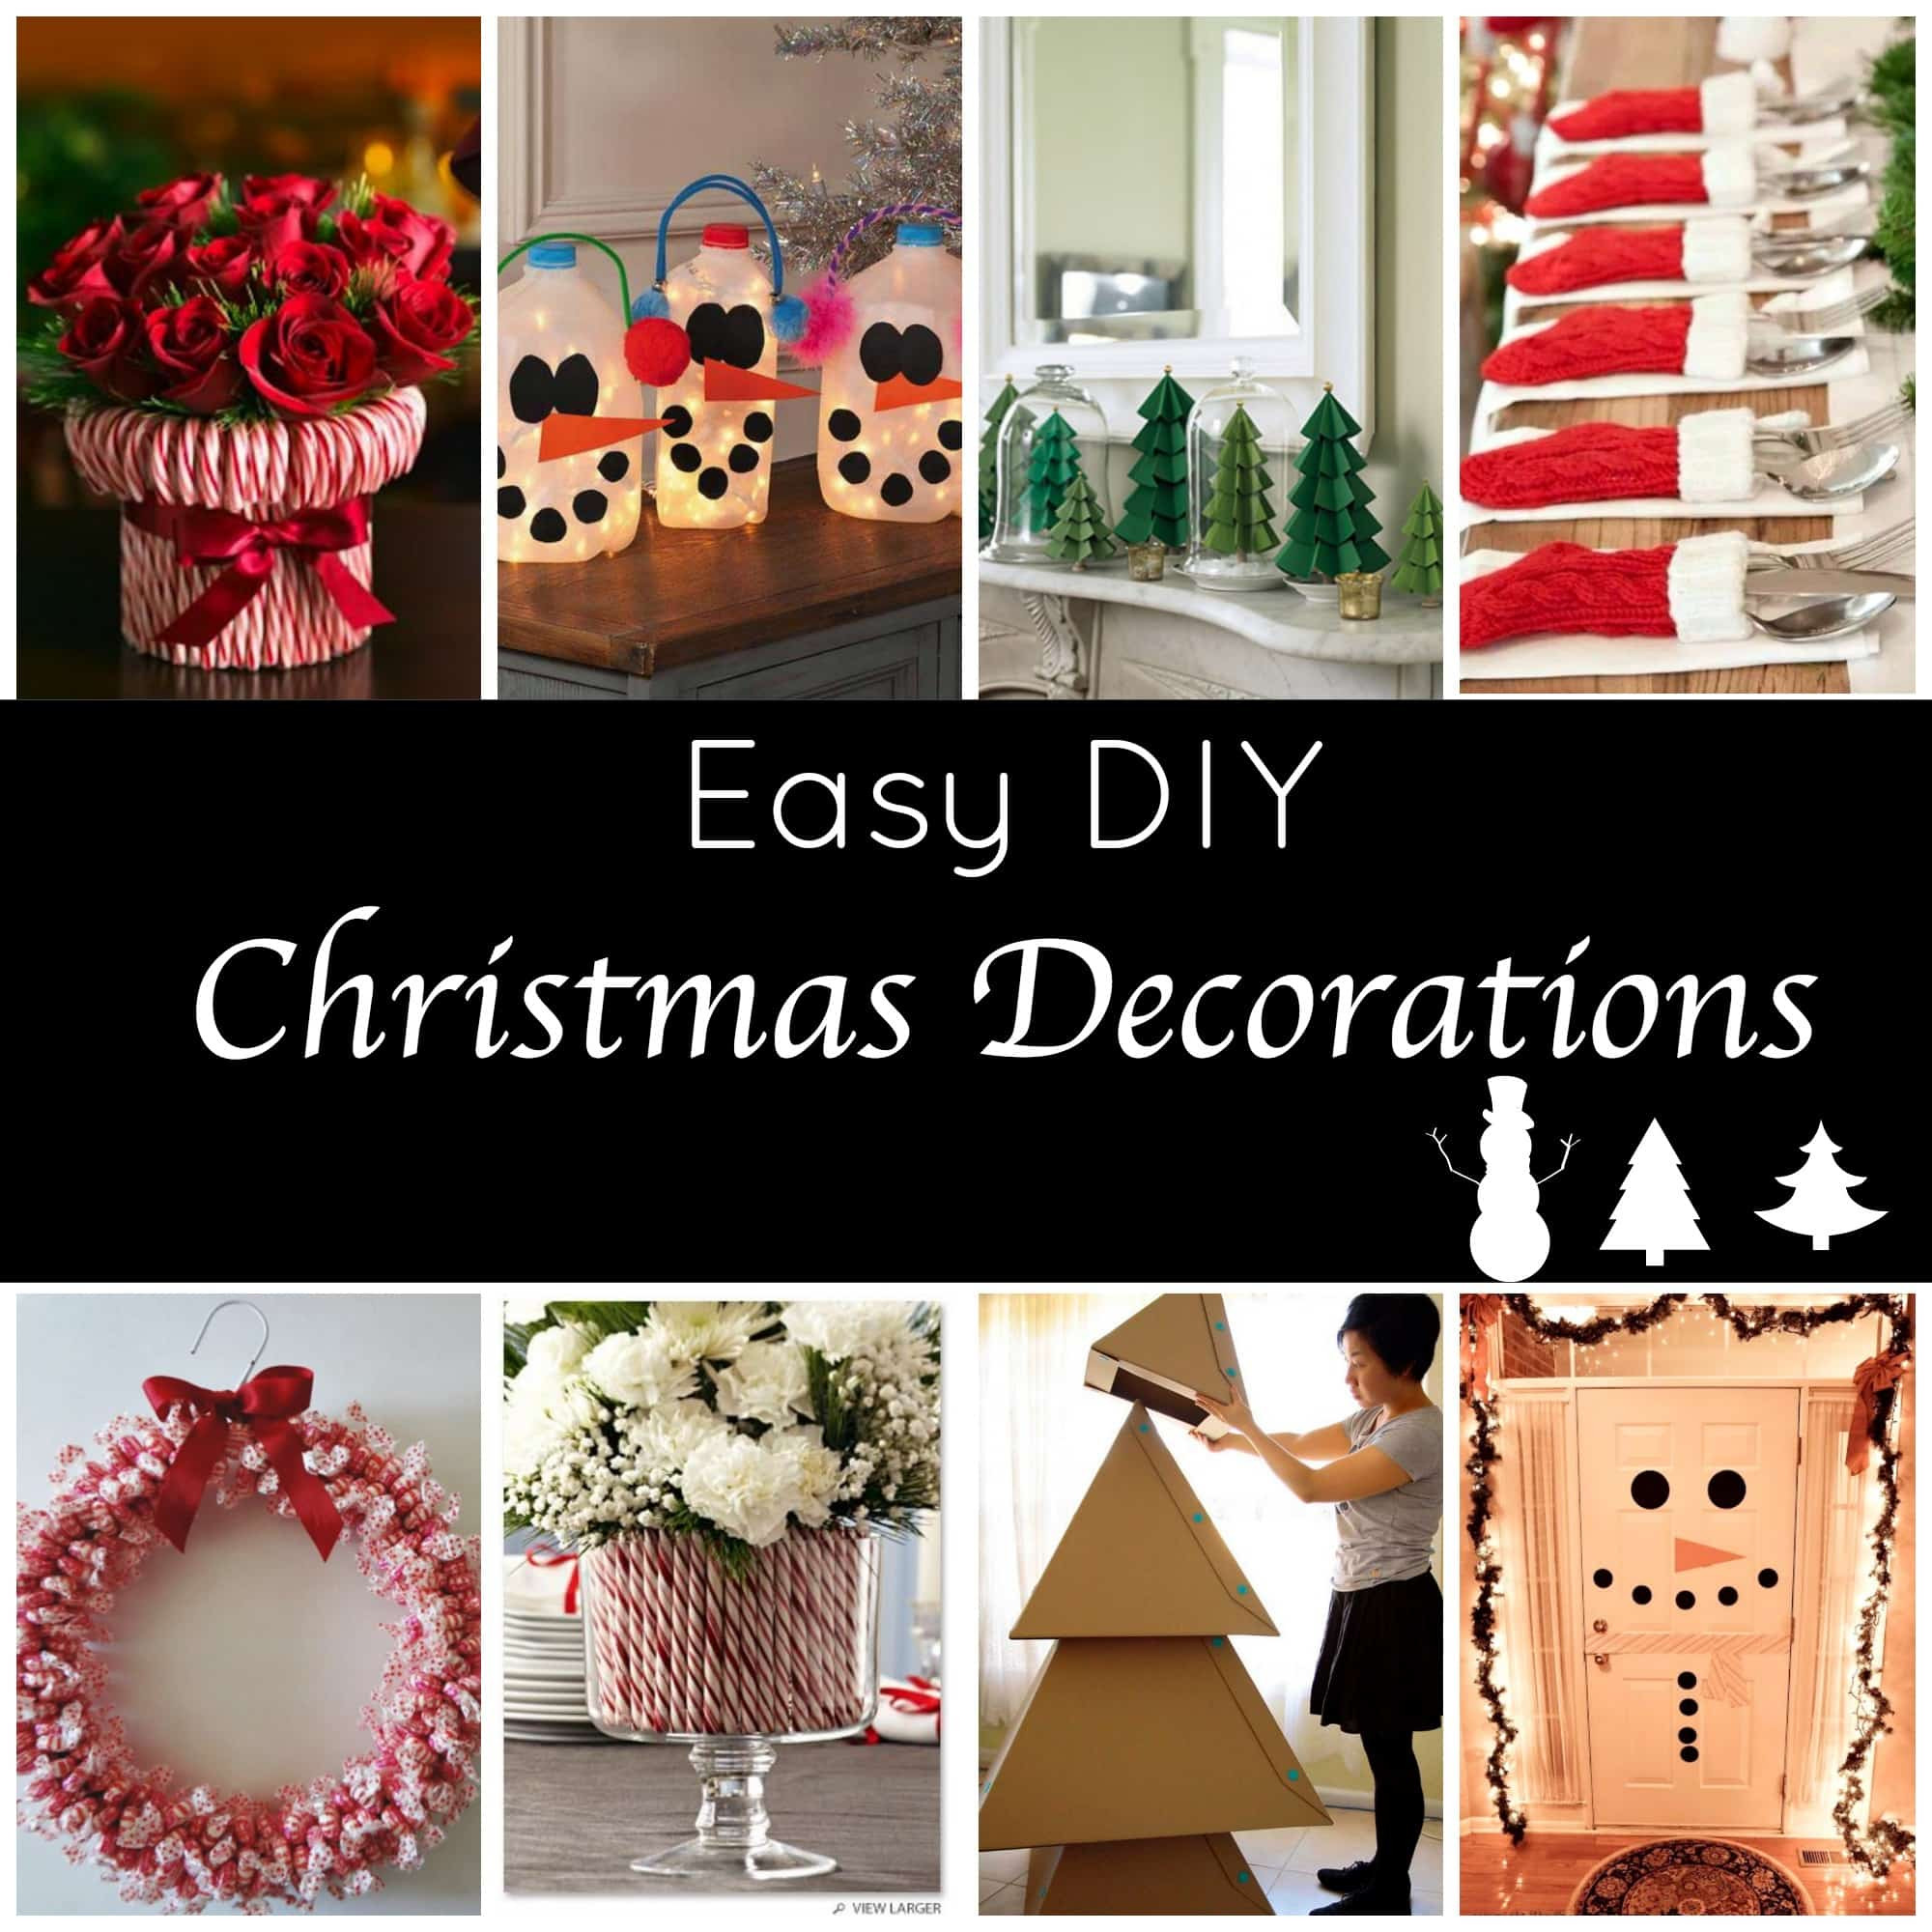 Christmas Decoration Ideas DIY
 Cute & Easy Holiday Decorations Page 2 of 2 Princess